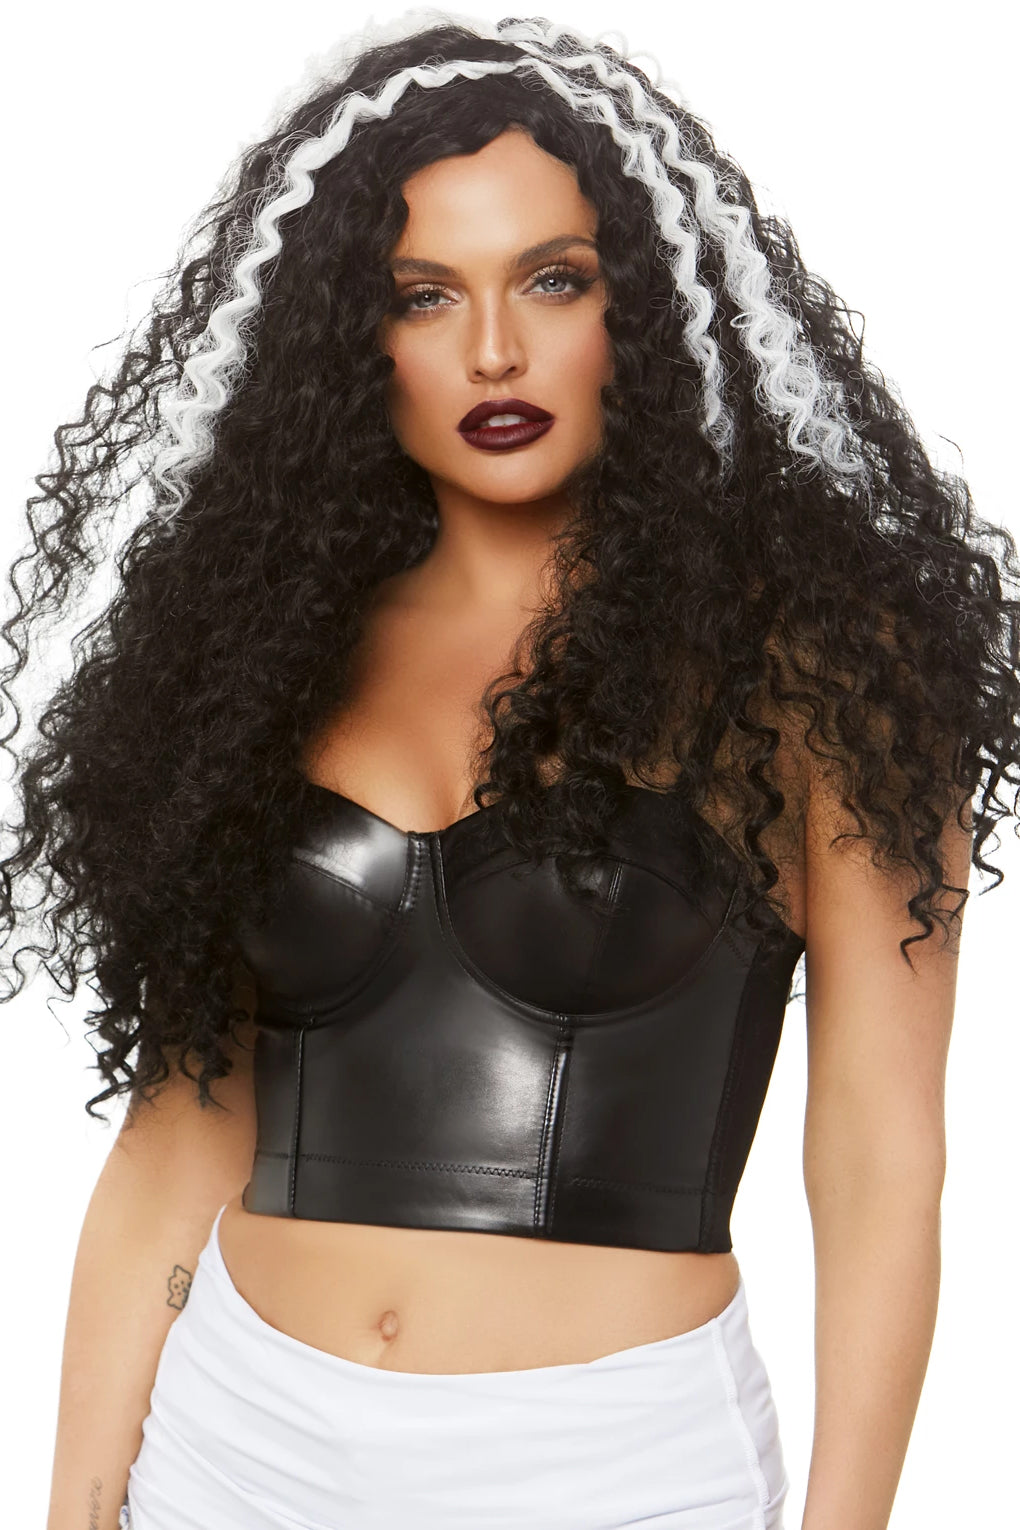 Long Curly Black/White Wig